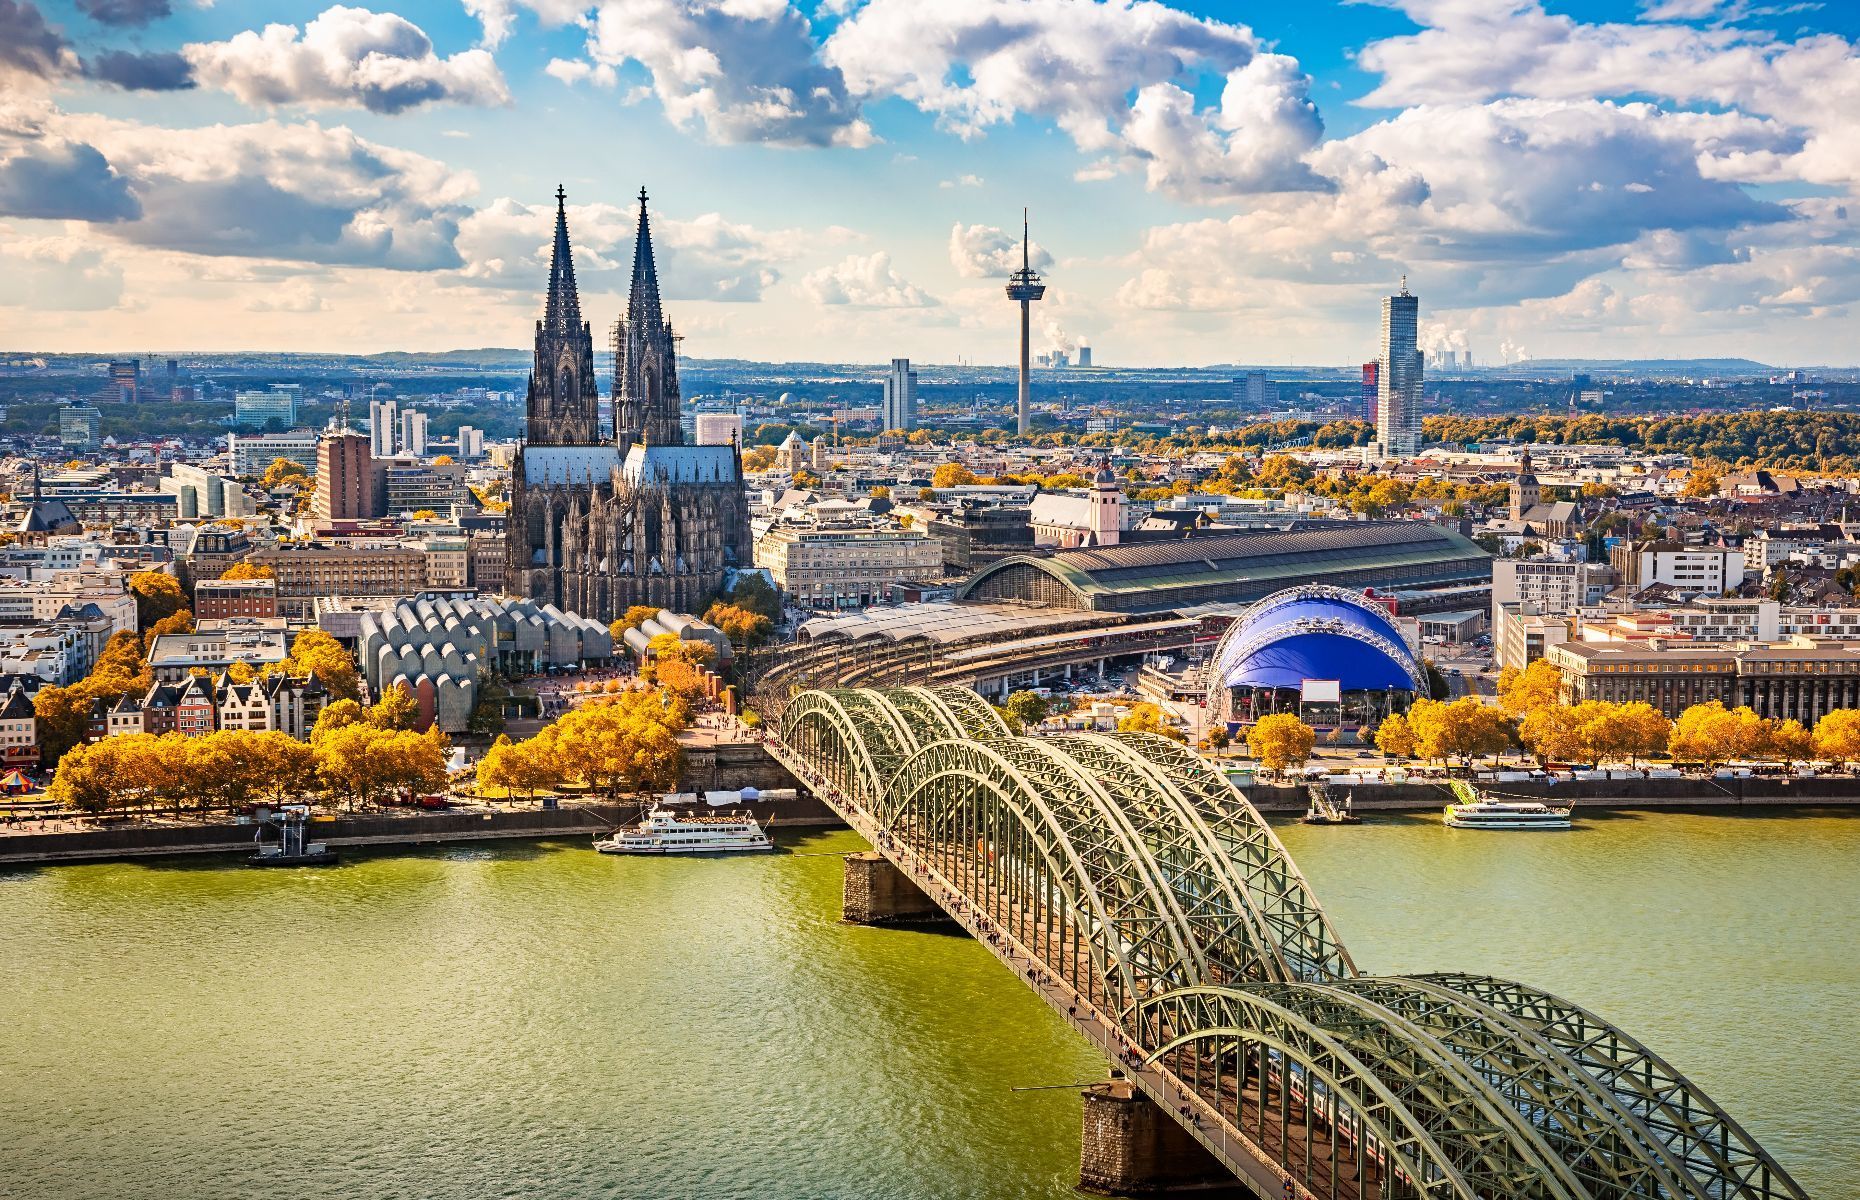 <p>Tourism in Germany is typically centred on Berlin, Munich, and Hamburg, but Cologne is just as worthy of a visit. The 2,000-year-old city, situated along the Rhine River, is a cultural goldmine, home to <a href="https://www.planetware.com/tourist-attractions-/cologne-d-nw-col.htm" rel="noreferrer noopener">dozens of museums and over 100 art galleries</a> as well as buildings and neighbourhoods dating back to the Middle Ages.</p>